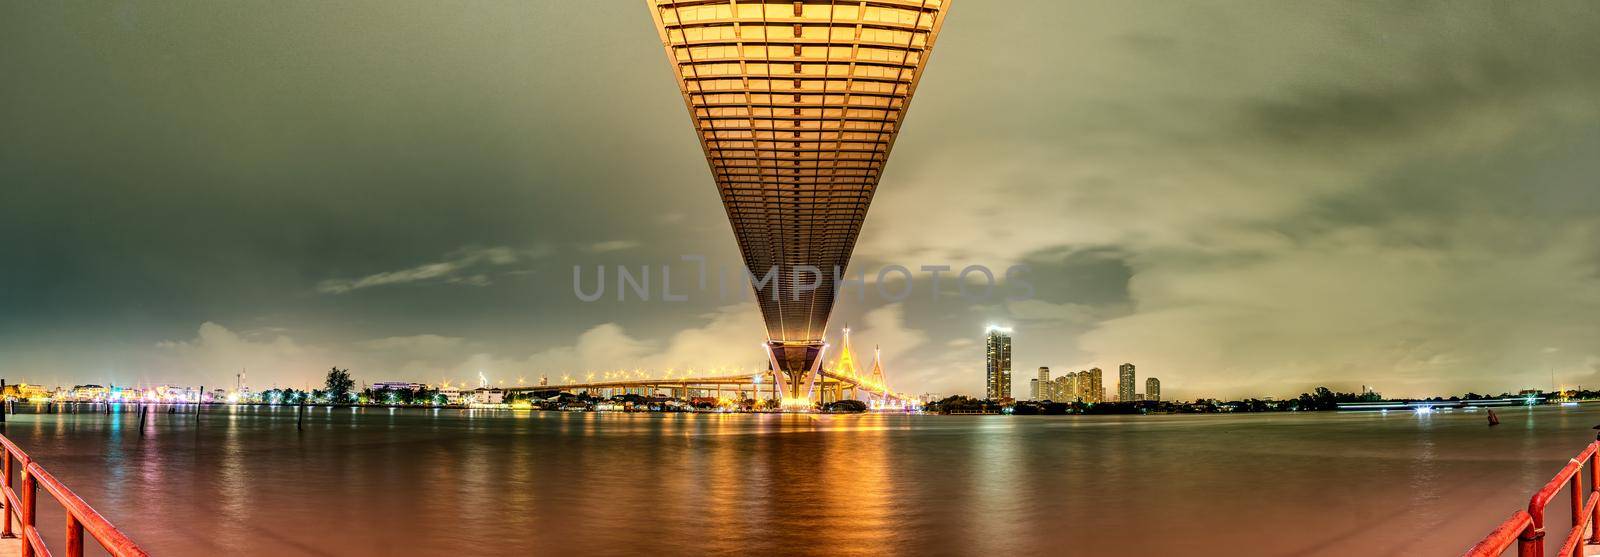 Panorama Oreng led light under the bridge over the river On a cloudy day in the sky. Bhumibol Bridge, Samut Prakan, Thailand